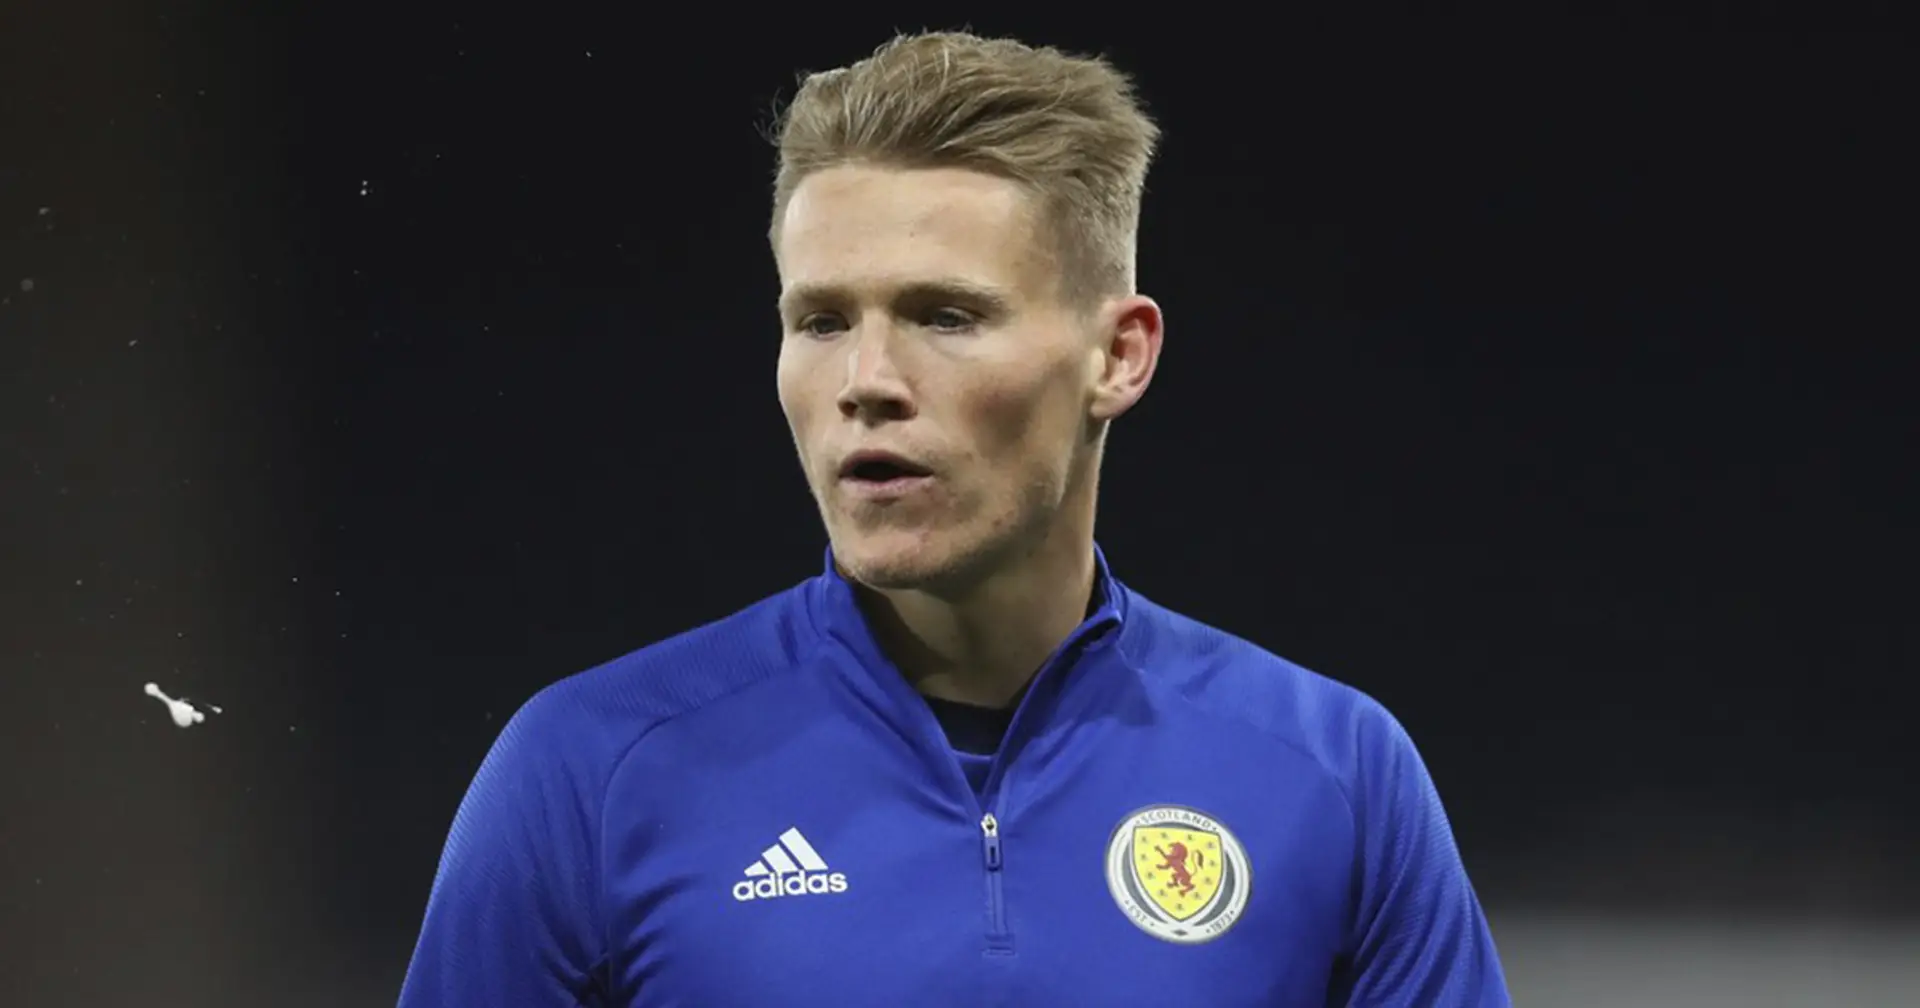 Centre-back solution found? McTominay impresses at the back against Czech Republic